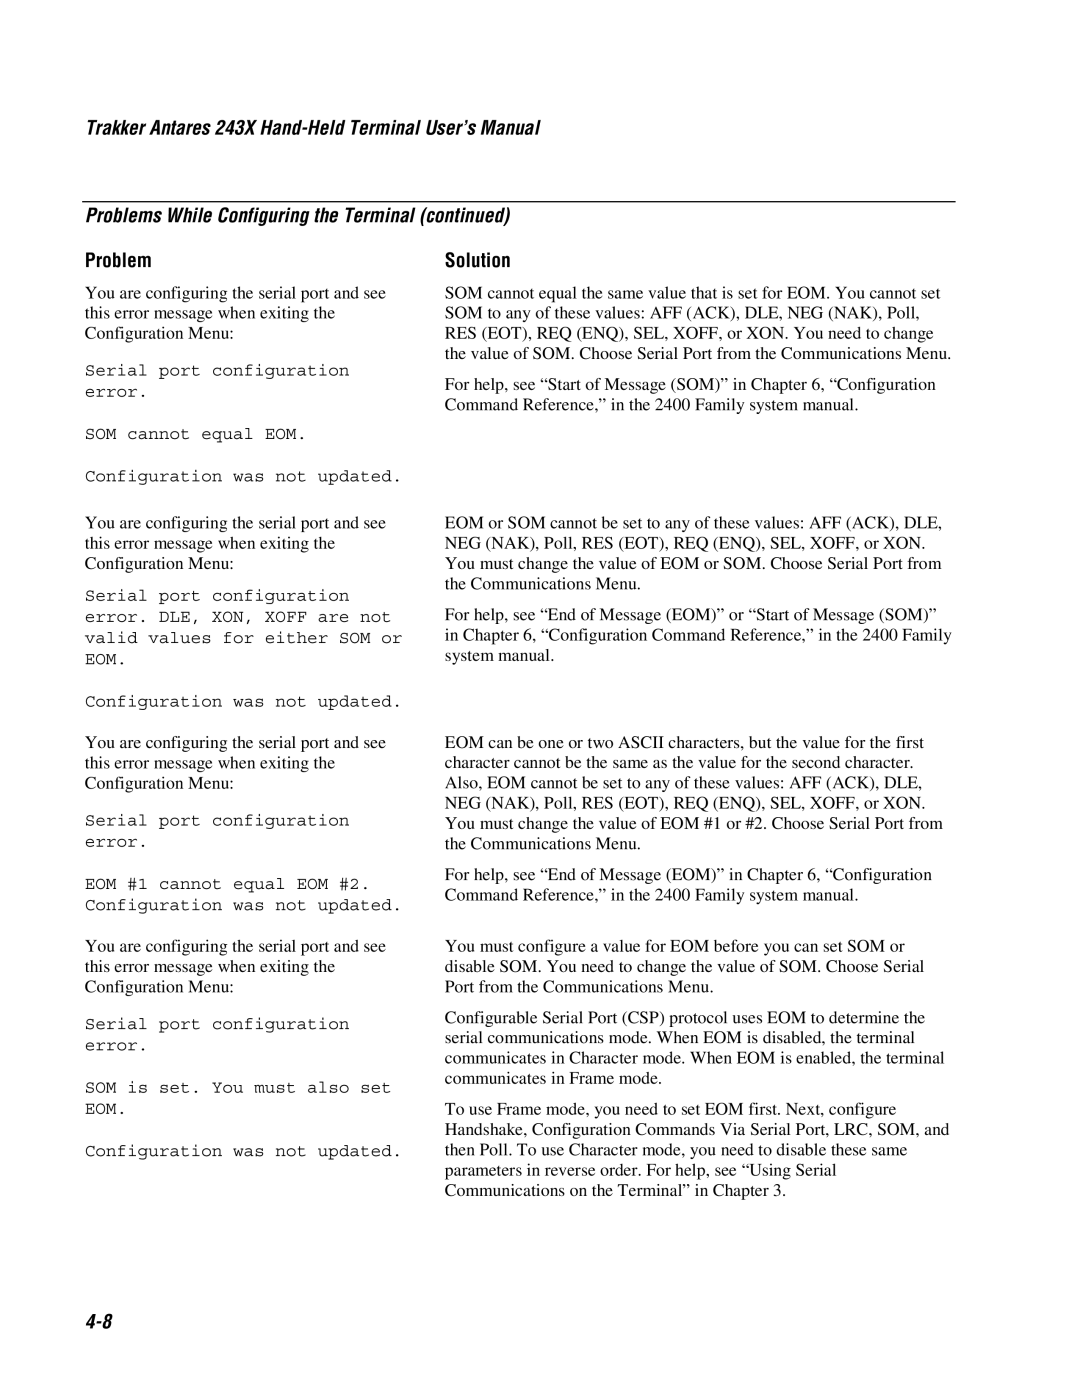 IBM user manual Trakker Antares 243X Hand-Held Terminal User’s Manual, Problems While Configuring the Terminal continued 